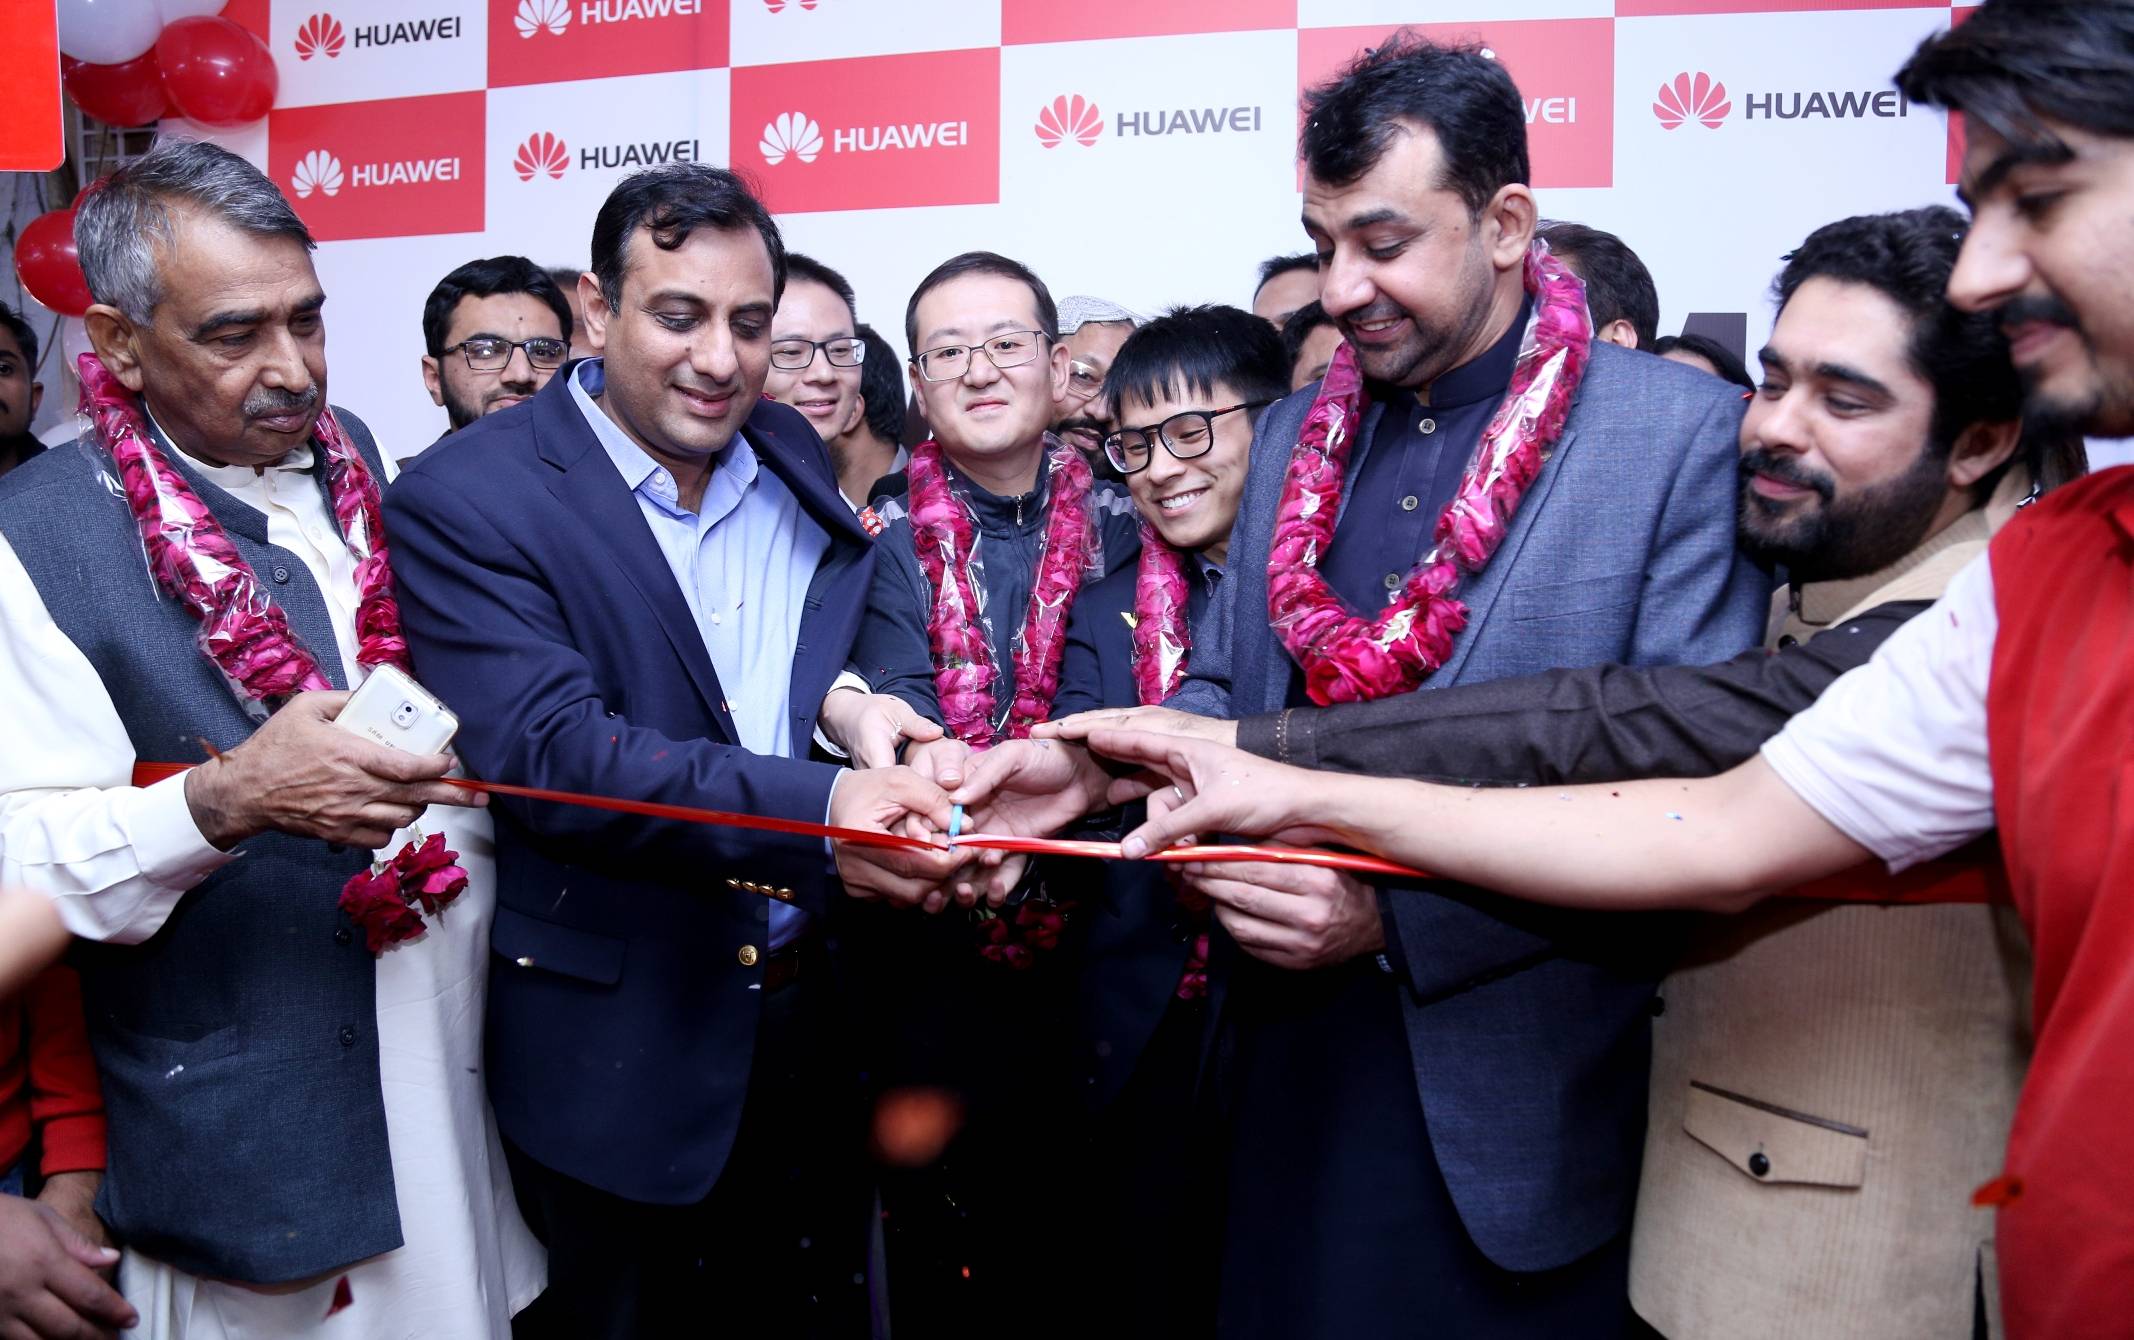 HUAWEI Shows its Love for the People of Sargodha